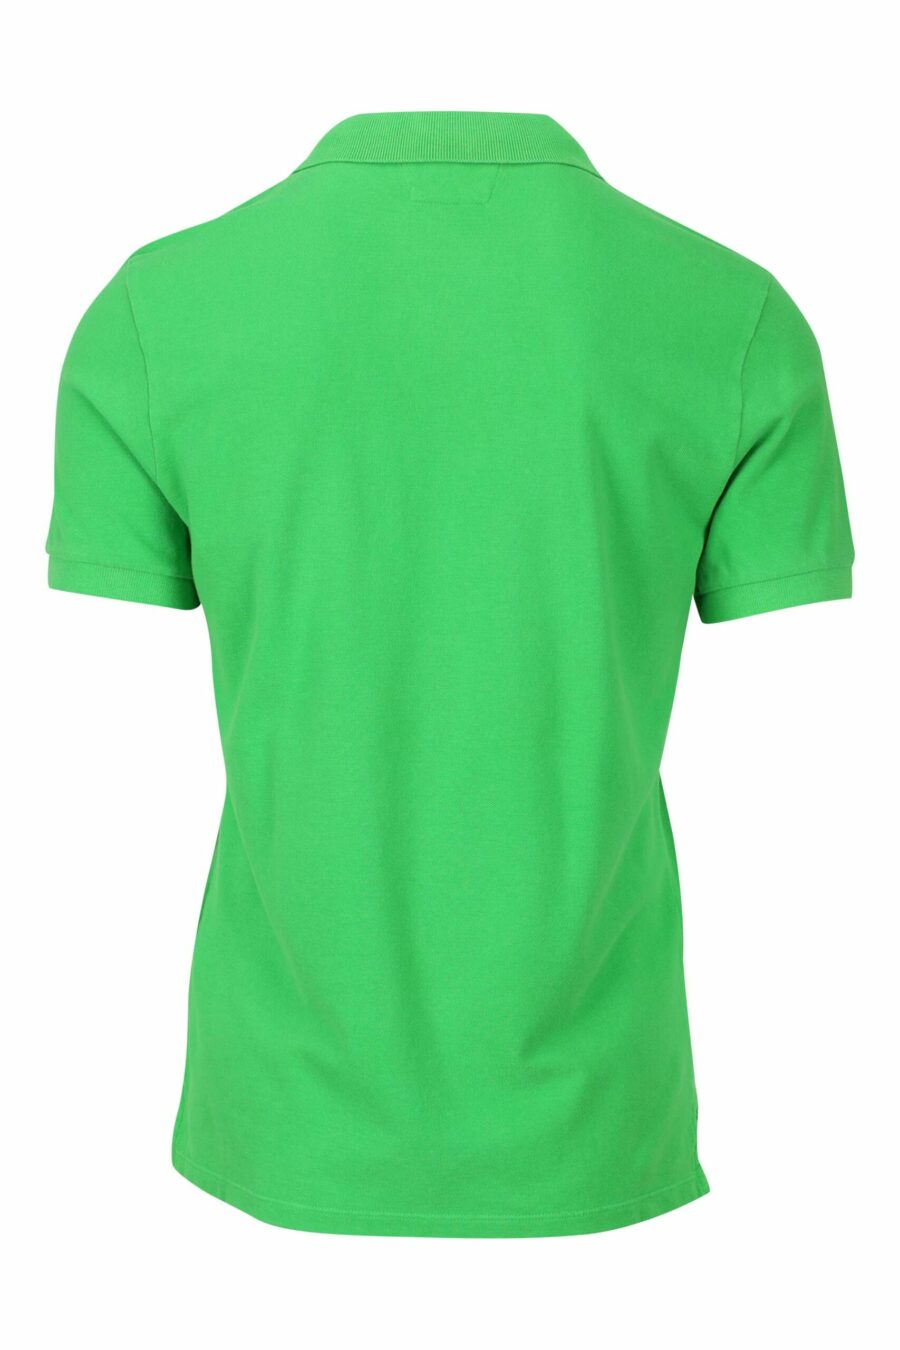 Green polo shirt with mini logo patch - 7620943642308 1 1 scaled